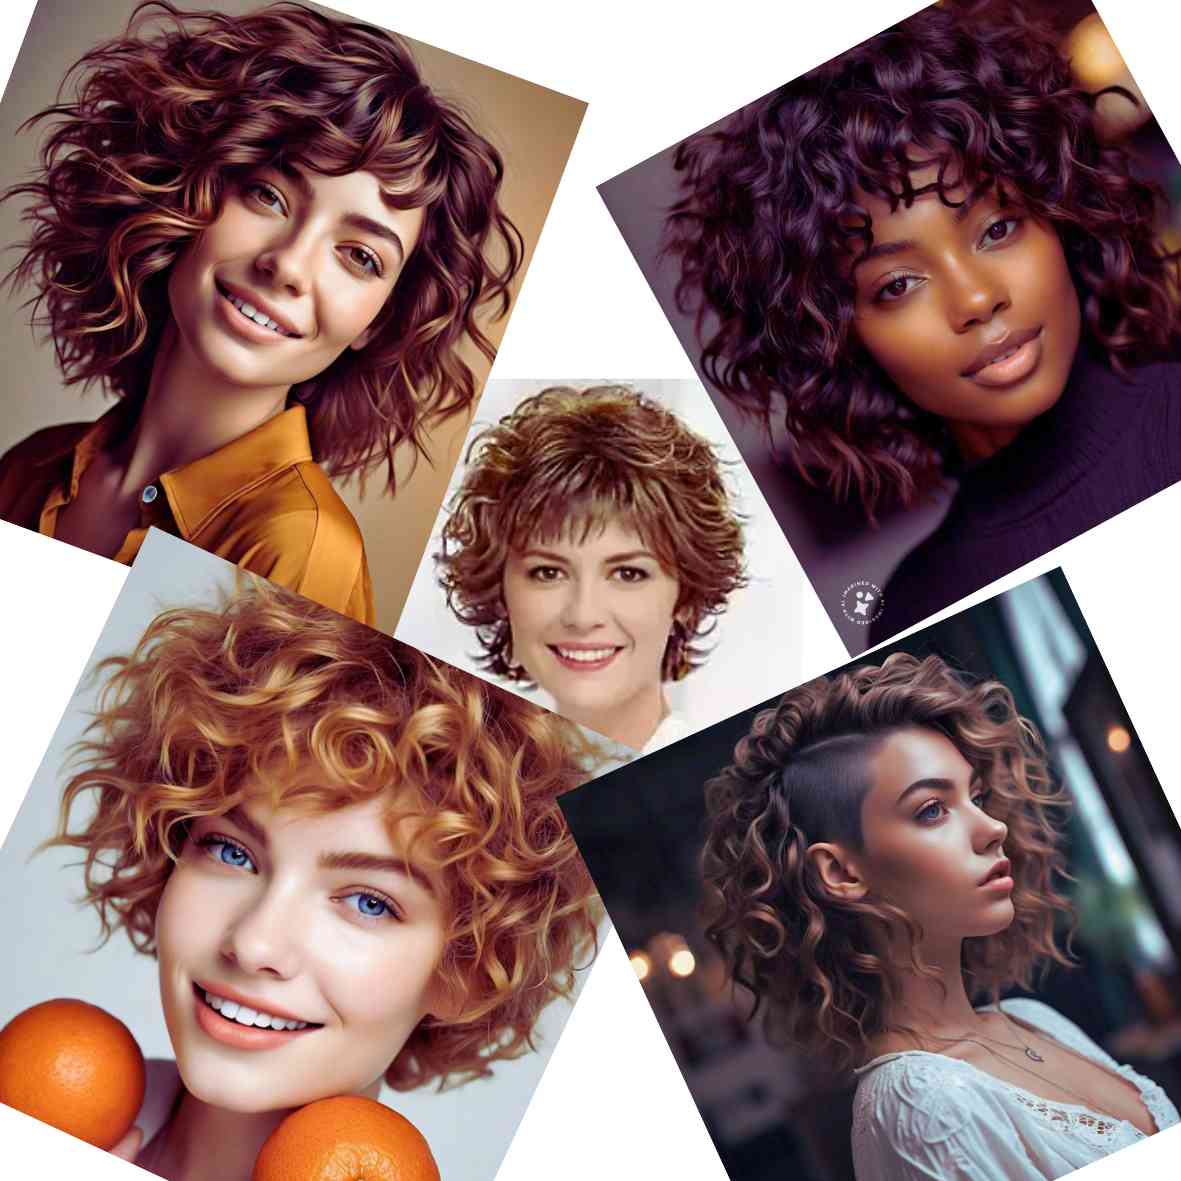 Short haircuts for women with curly hair, stylish and manageable hairstyles for curly-haired women